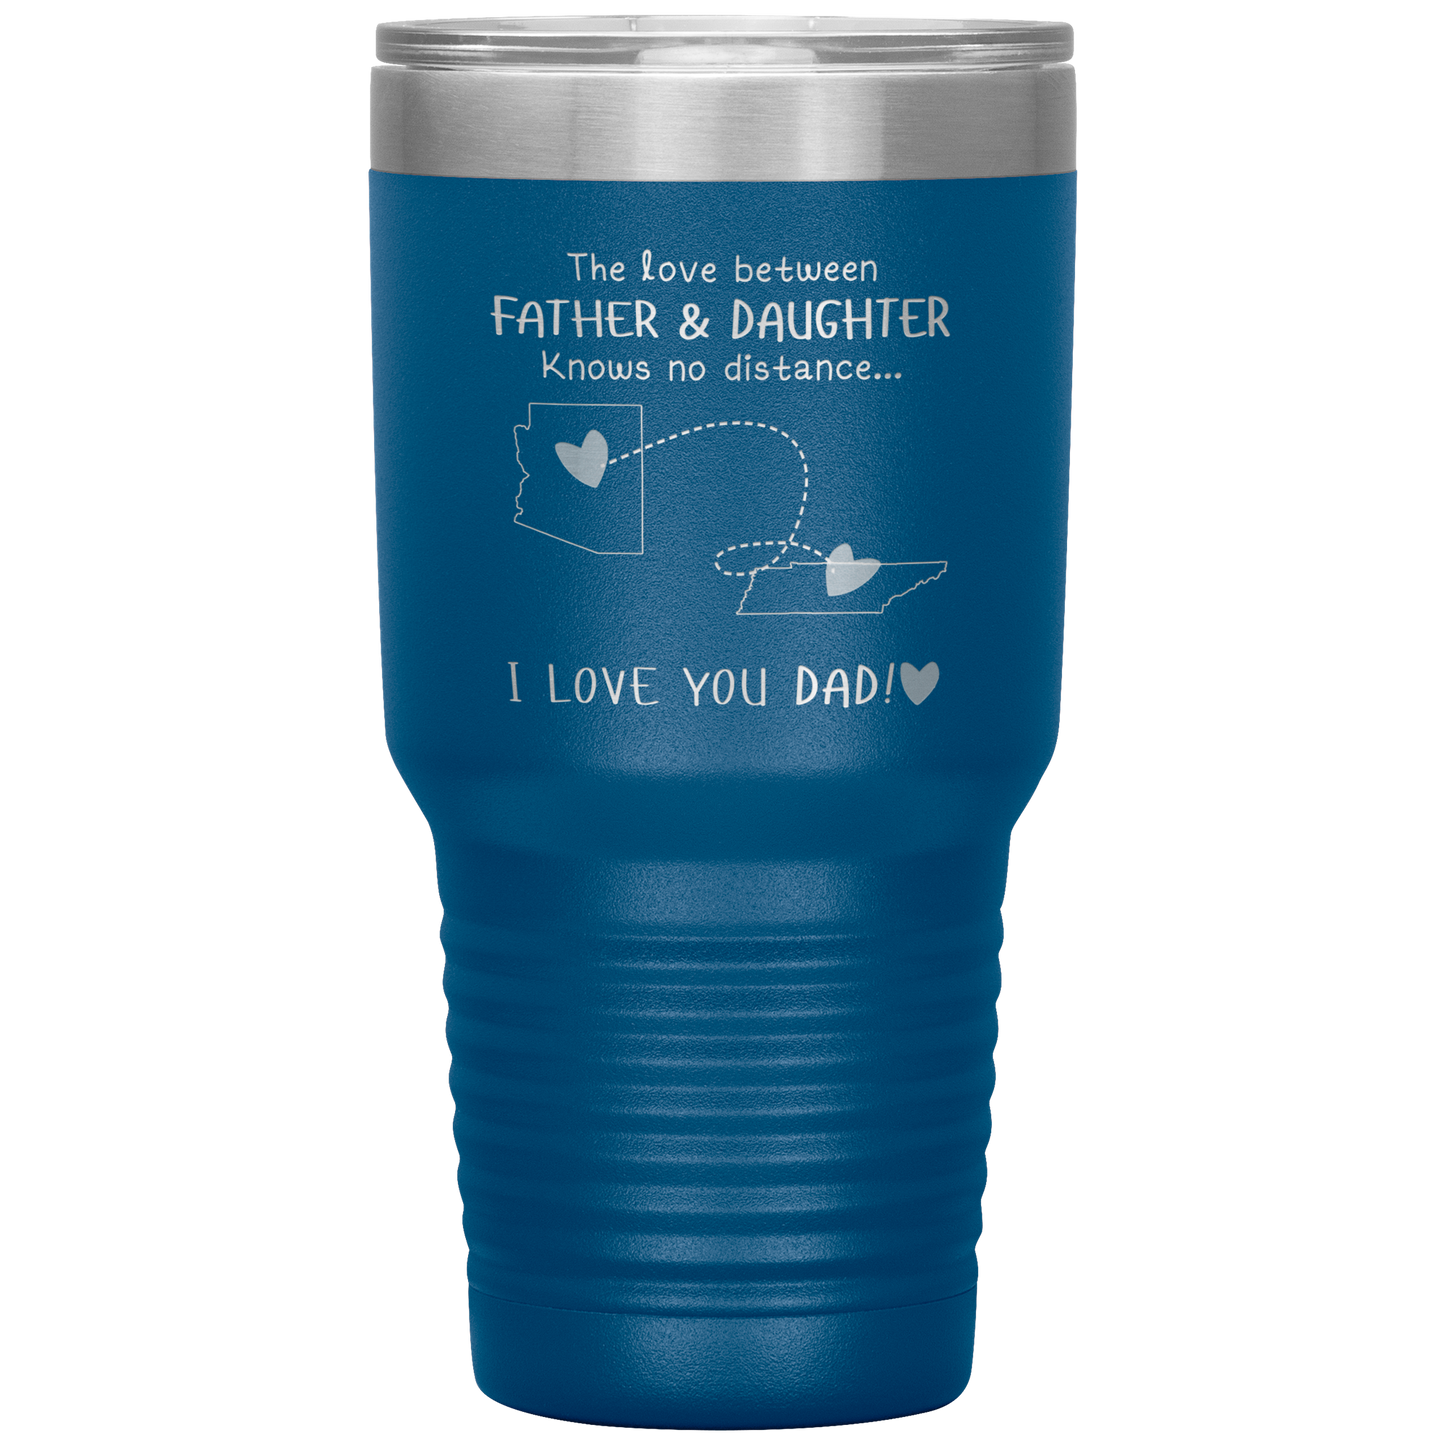 HNV-CUS-GRAND-sp-31100 - [ Arizona | Tennessee ] (Tumbler_30oz) Fathers Day Gifts Personalized Fathers Day Gifts Coffee Mug